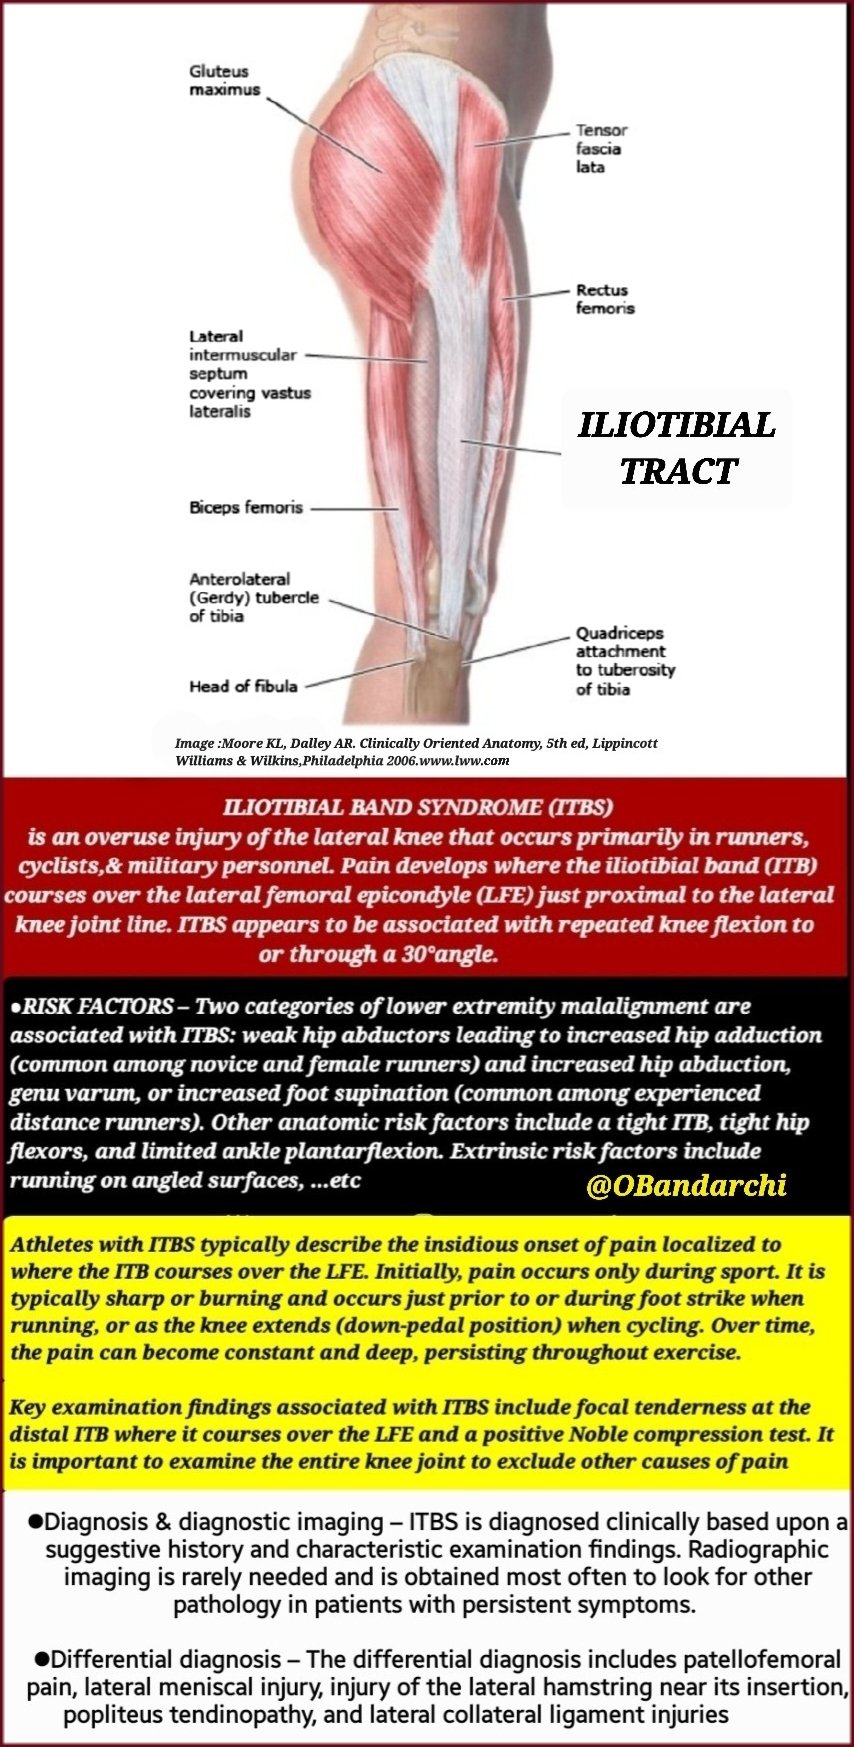 Dr. OMID BANDARCHI on X: Iliotibial band syndrome(ITBS): an overuse injury  causes knee pain or, less often,hip pain. It occurs when the iliotibial band  (IT band) becomes overly tight & irritated. It's